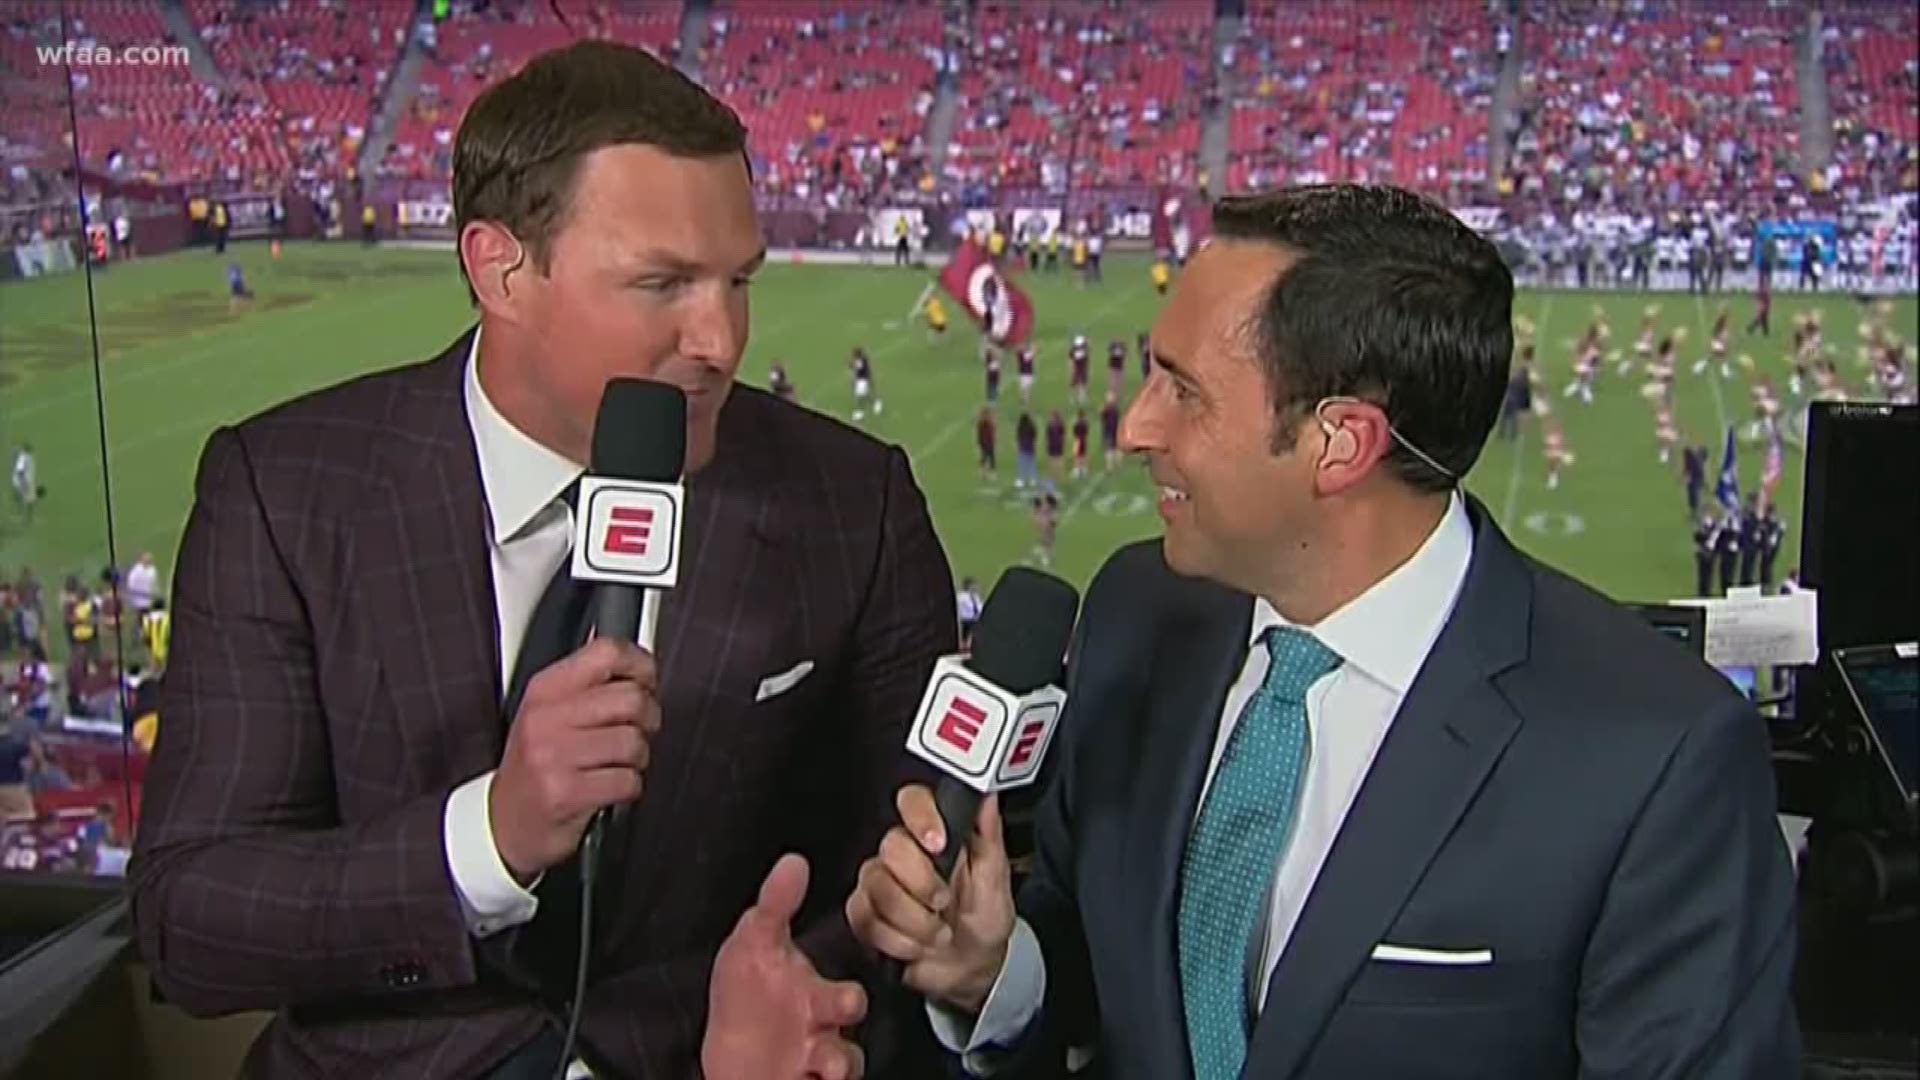 People were not vibing with Jason Witten in his broadcast debut